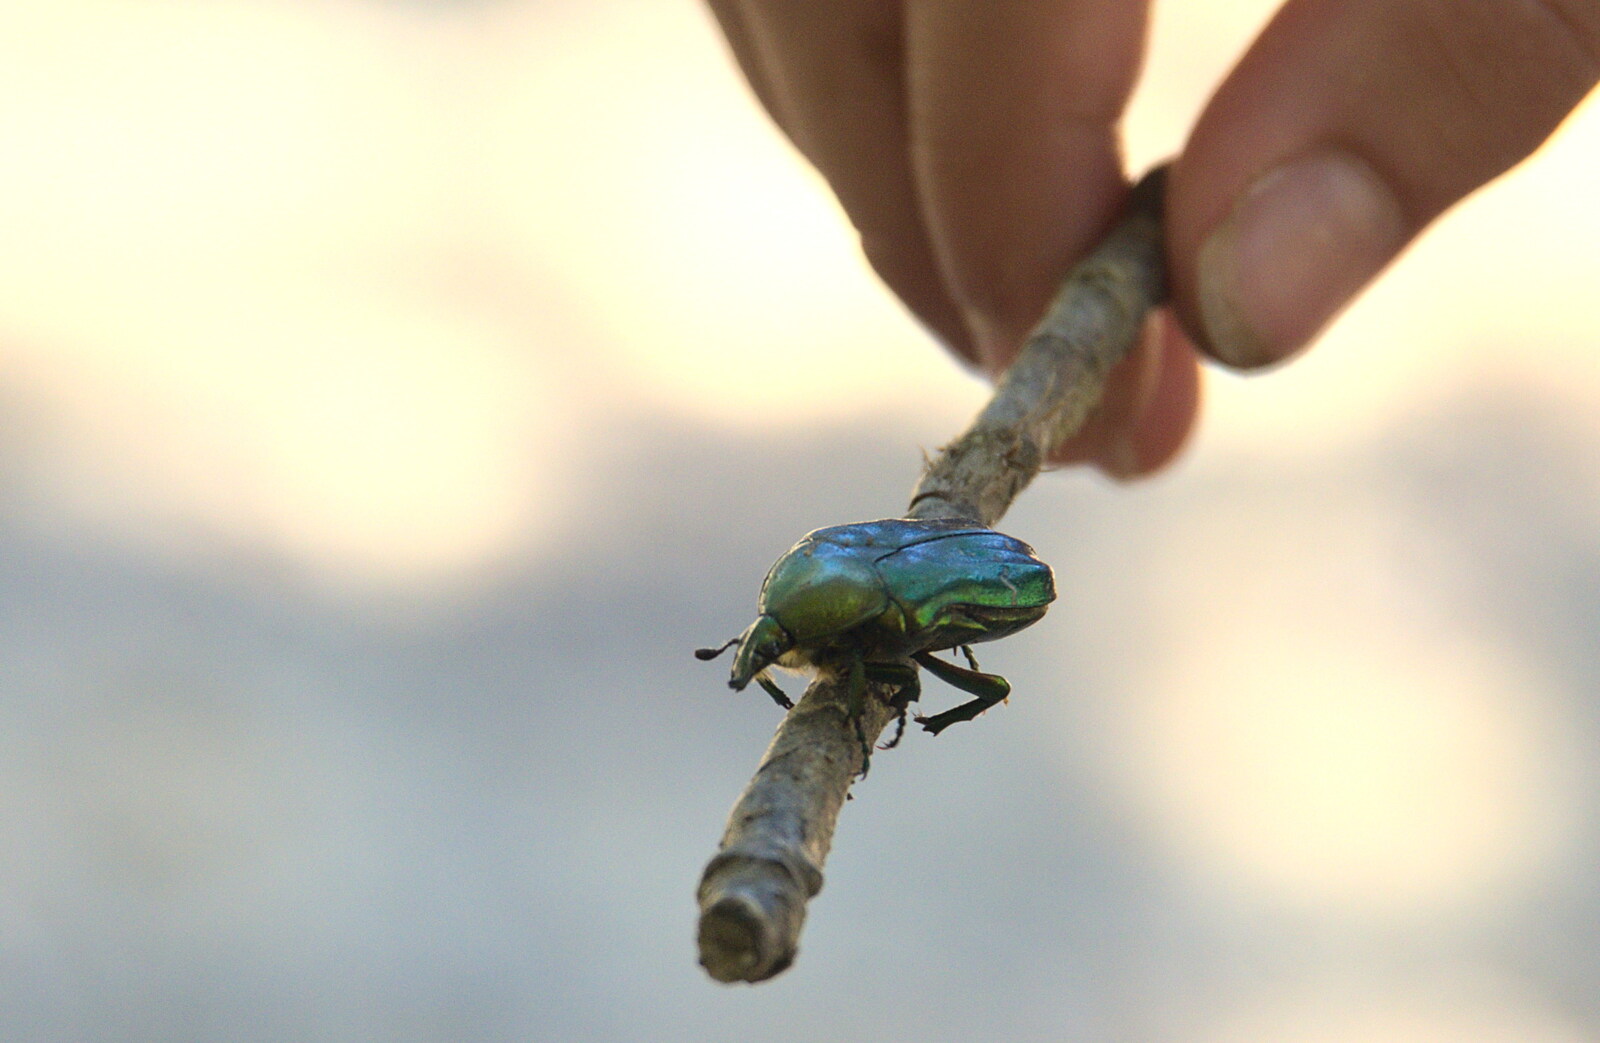 We find a nice green beetle on a stick from Abbaye Sainte-Marie de Lagrasse and The Lac de la Cavayère, Aude, France - 10th August